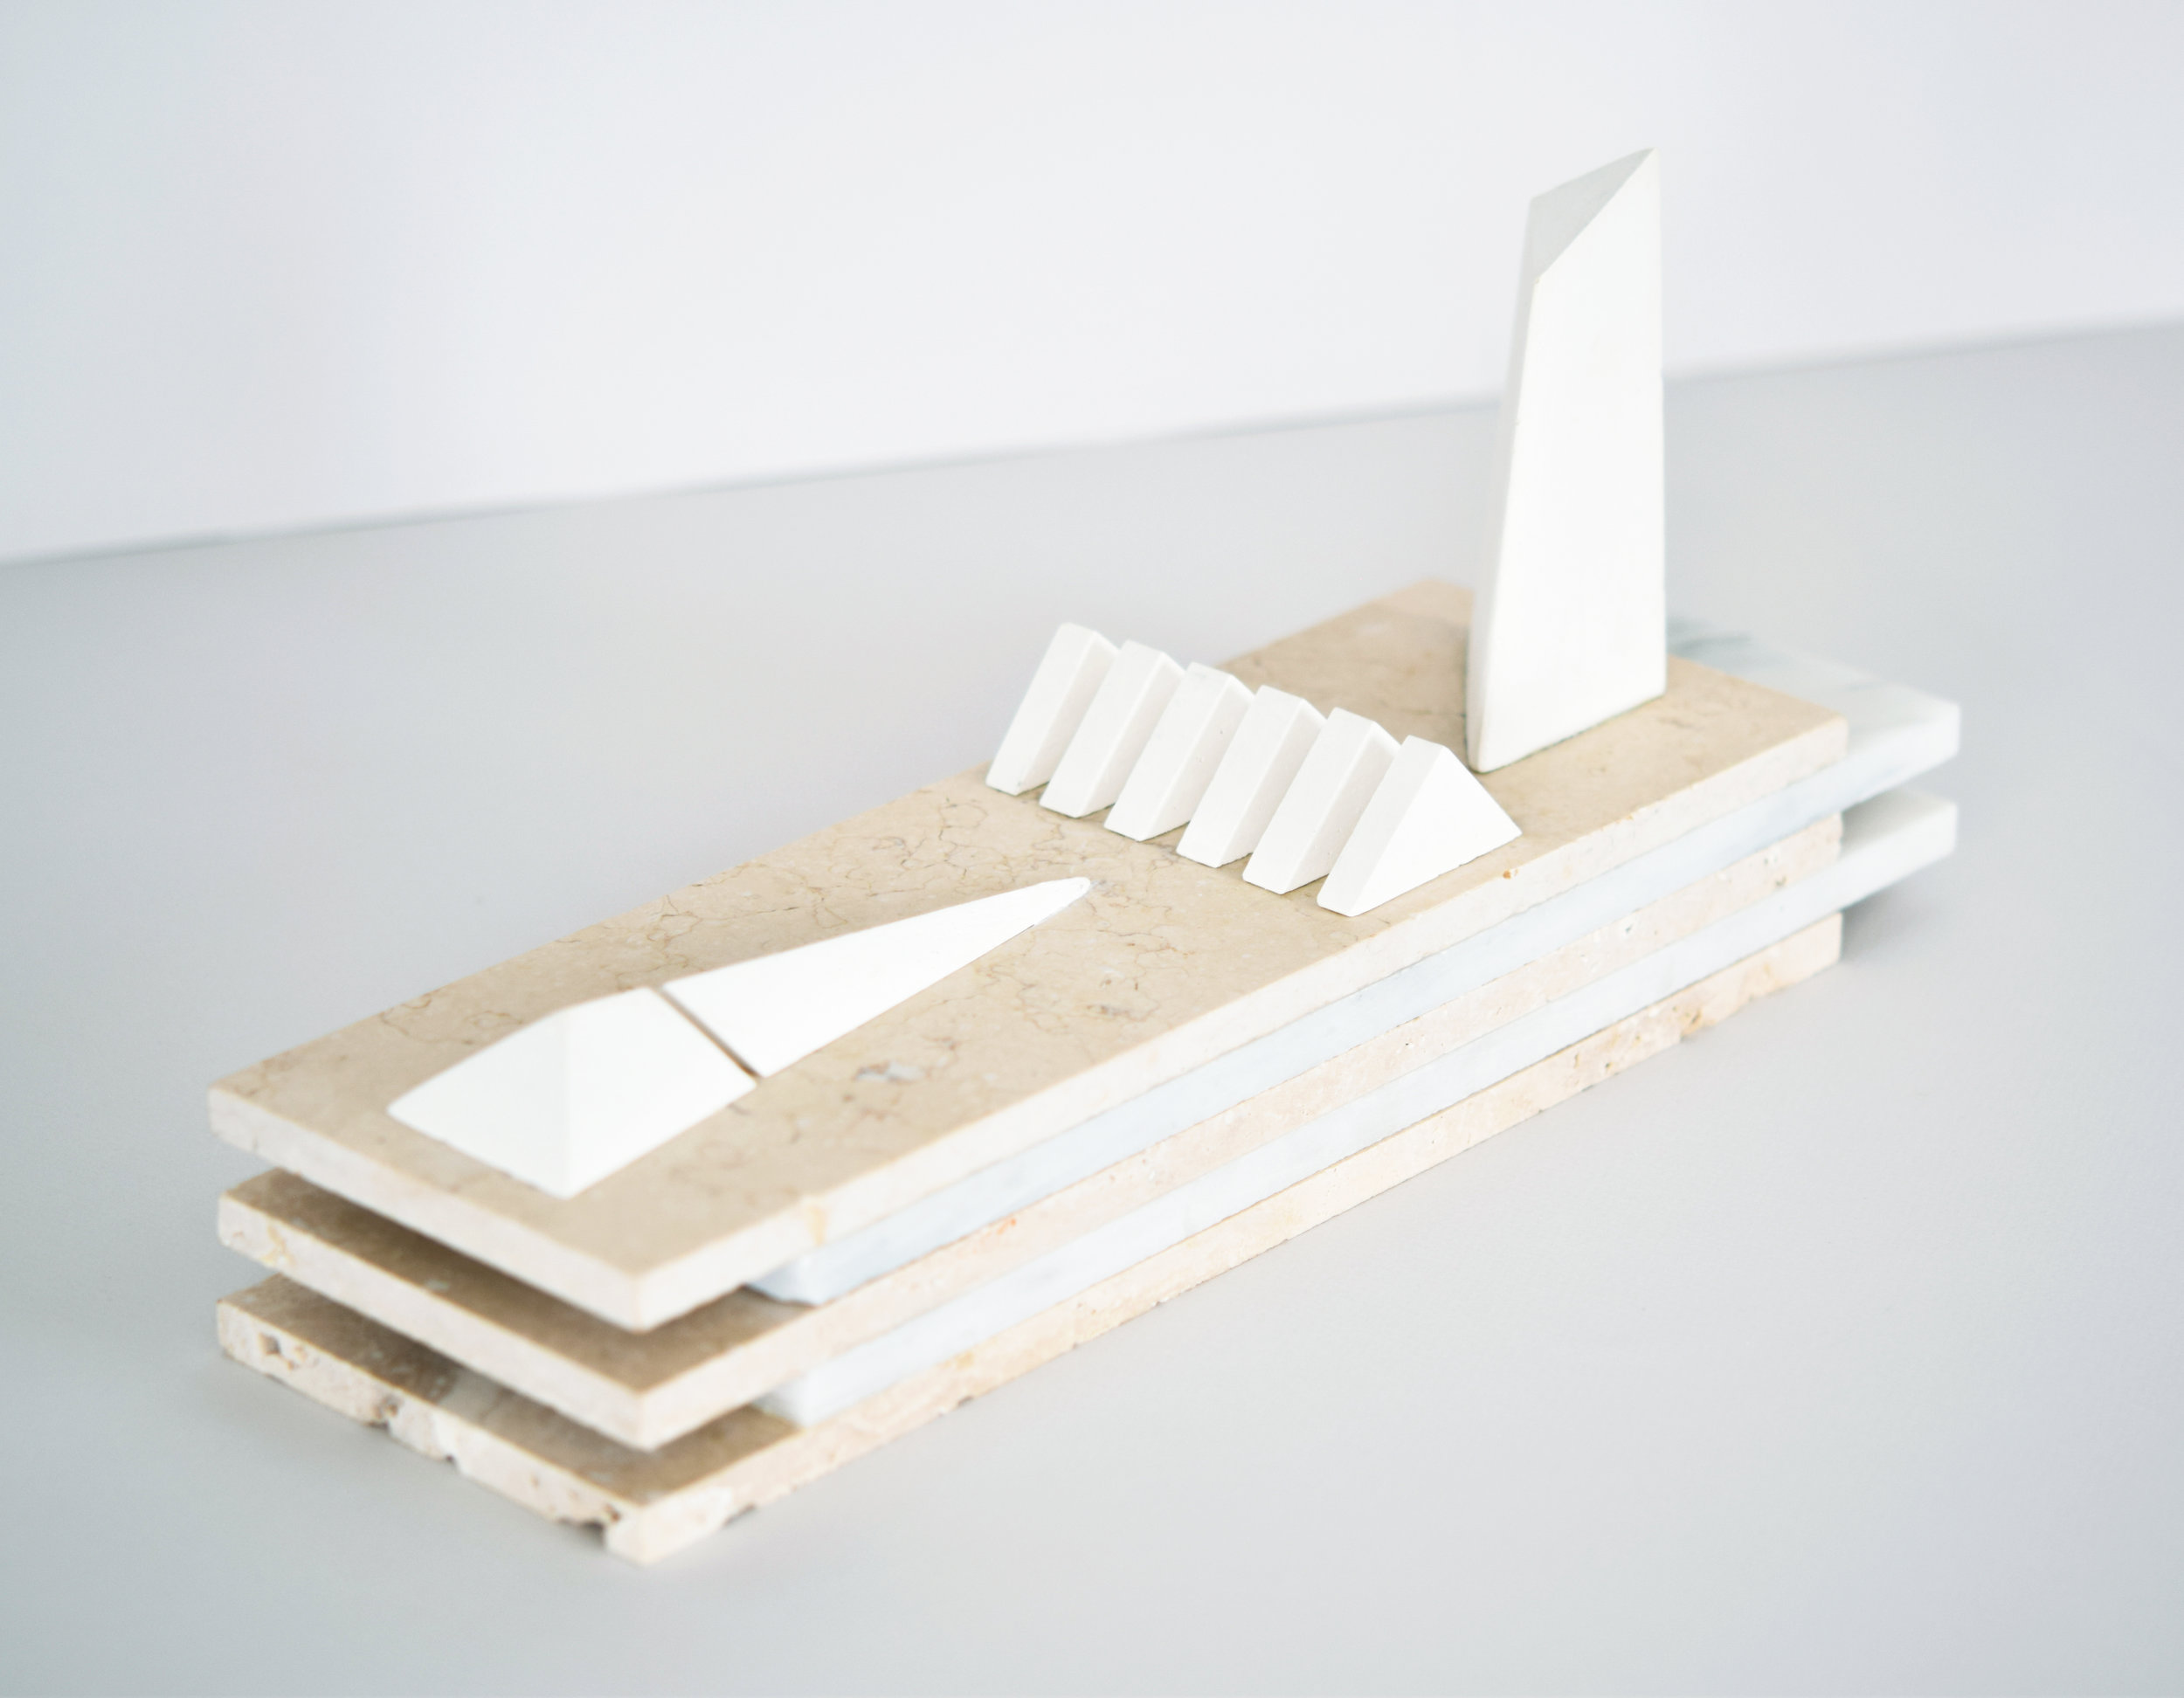   permission structures  2017 travertine, marble, cast plaster 15.5 in x 4 in x 6.5 in  